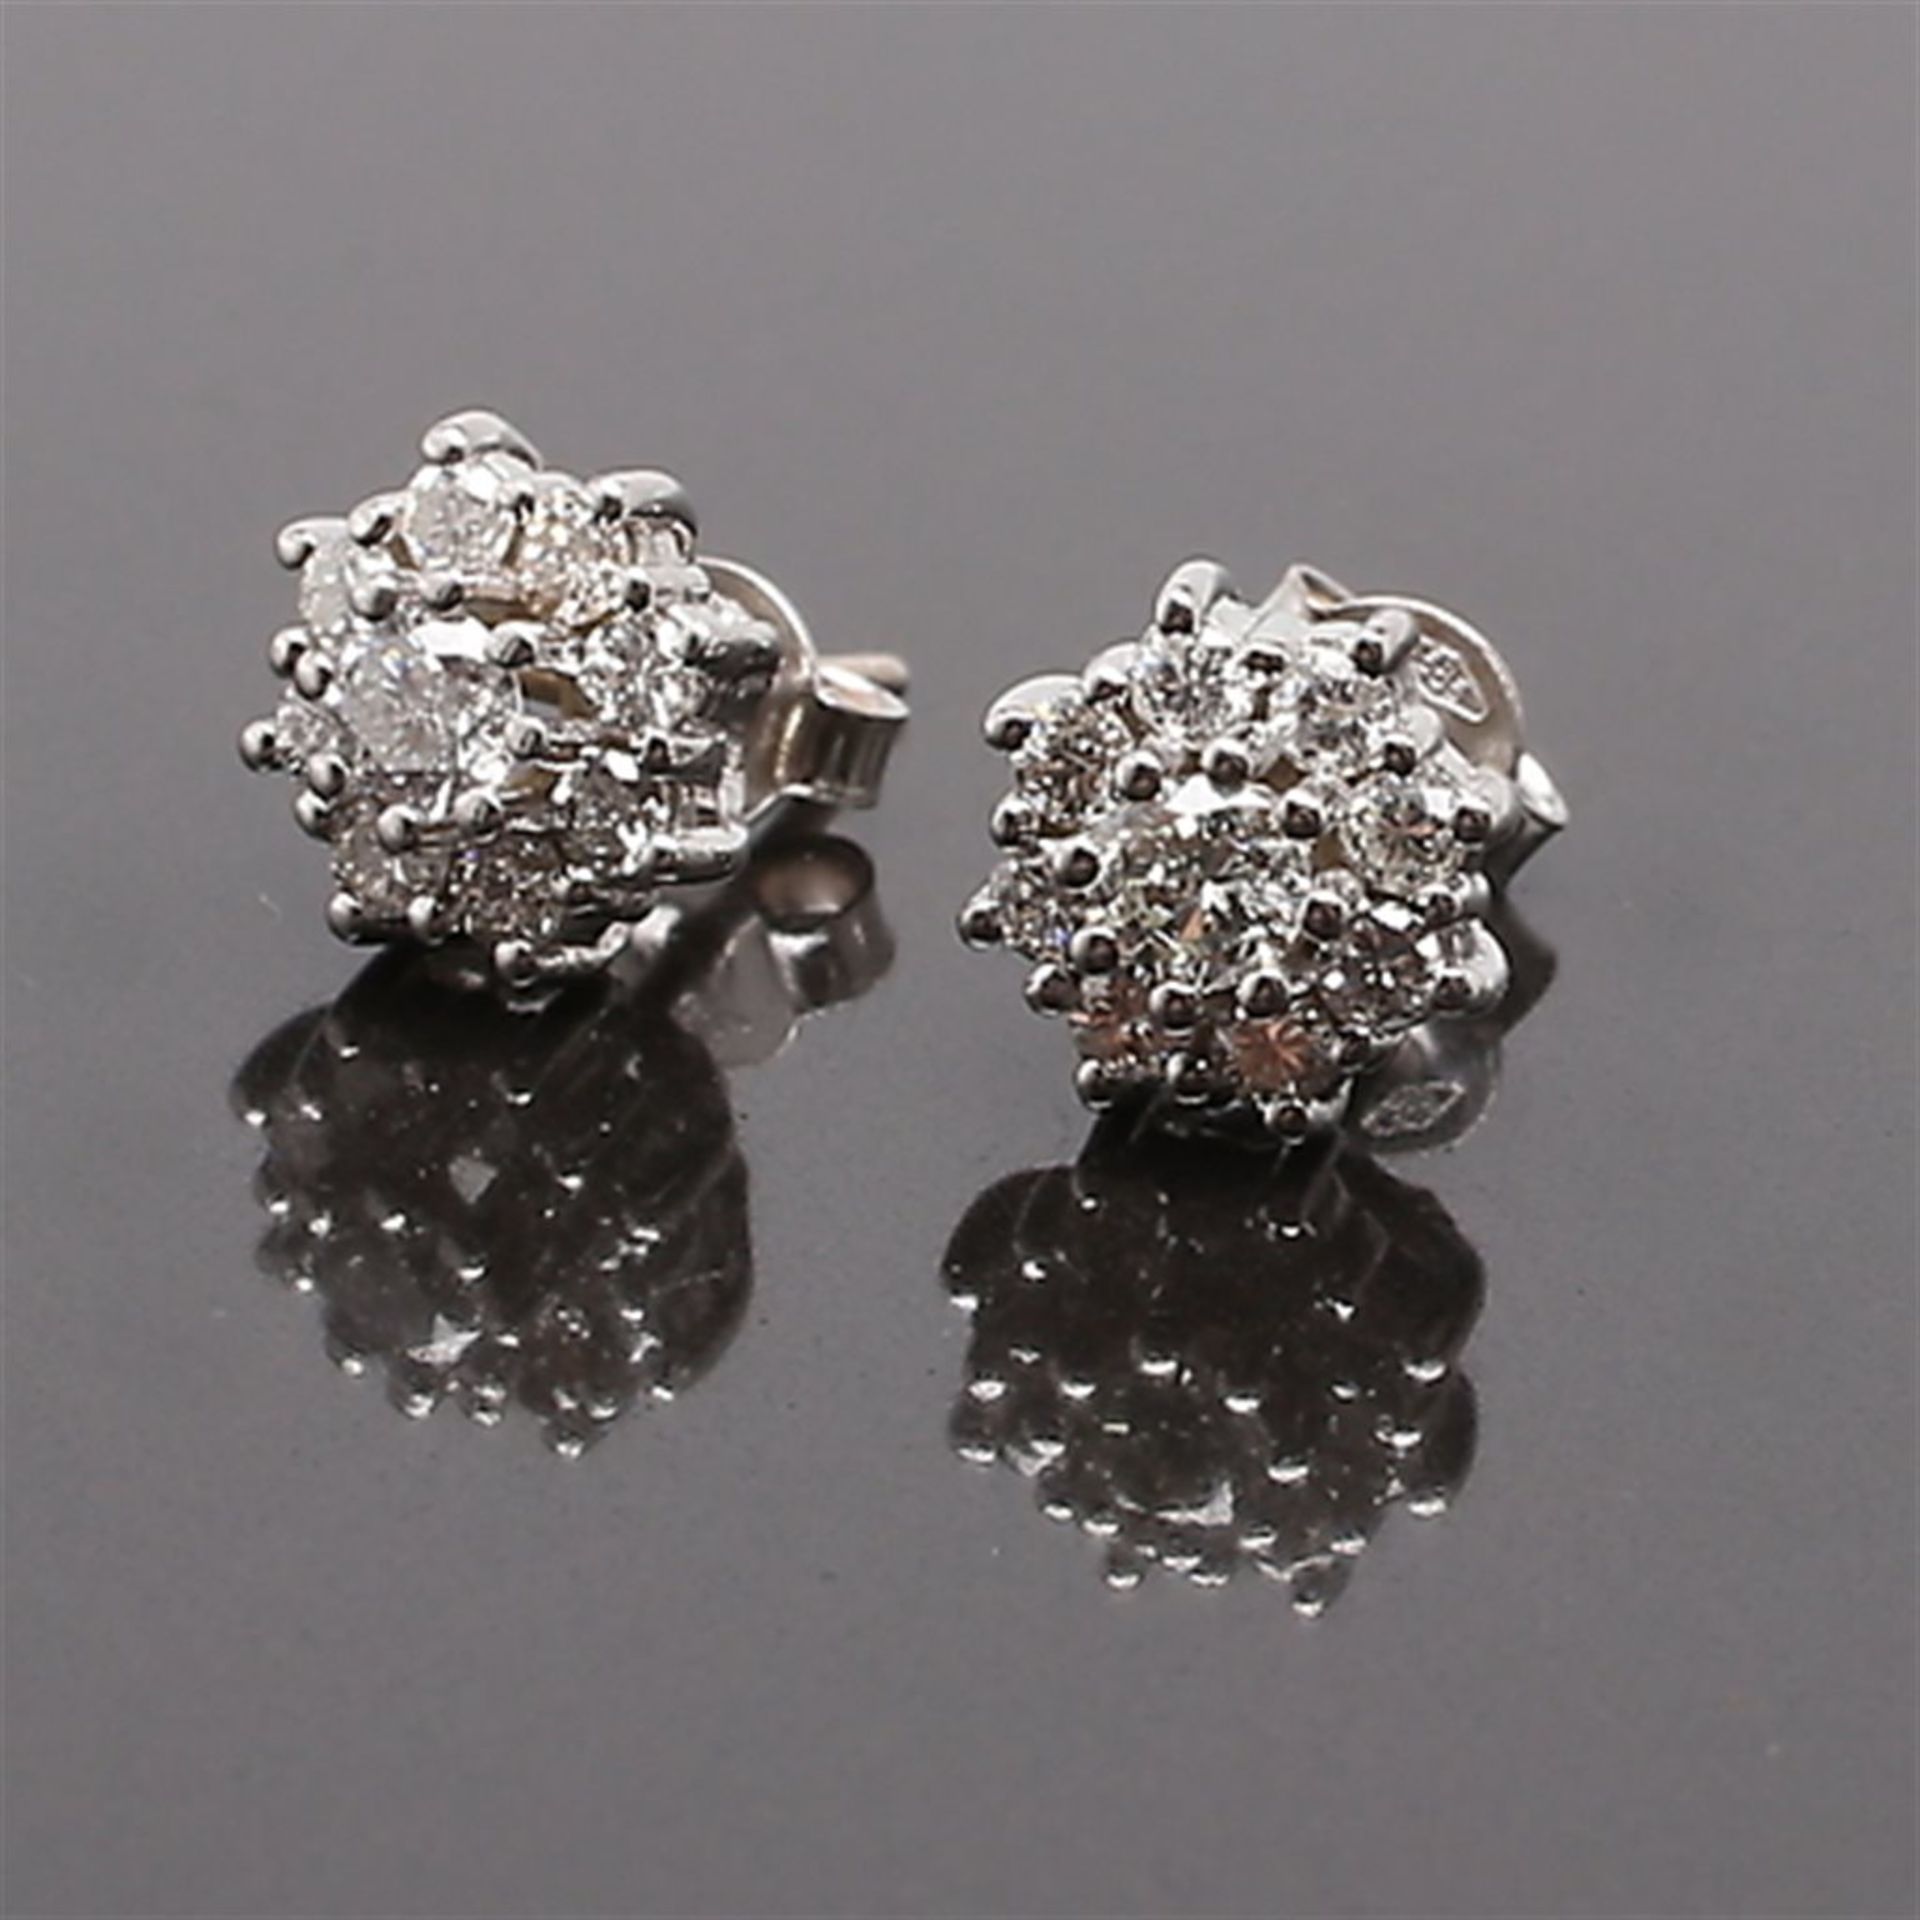 One pair earrings and pendant in white gold with diamonds totaling 1.41 ct. - Image 3 of 3